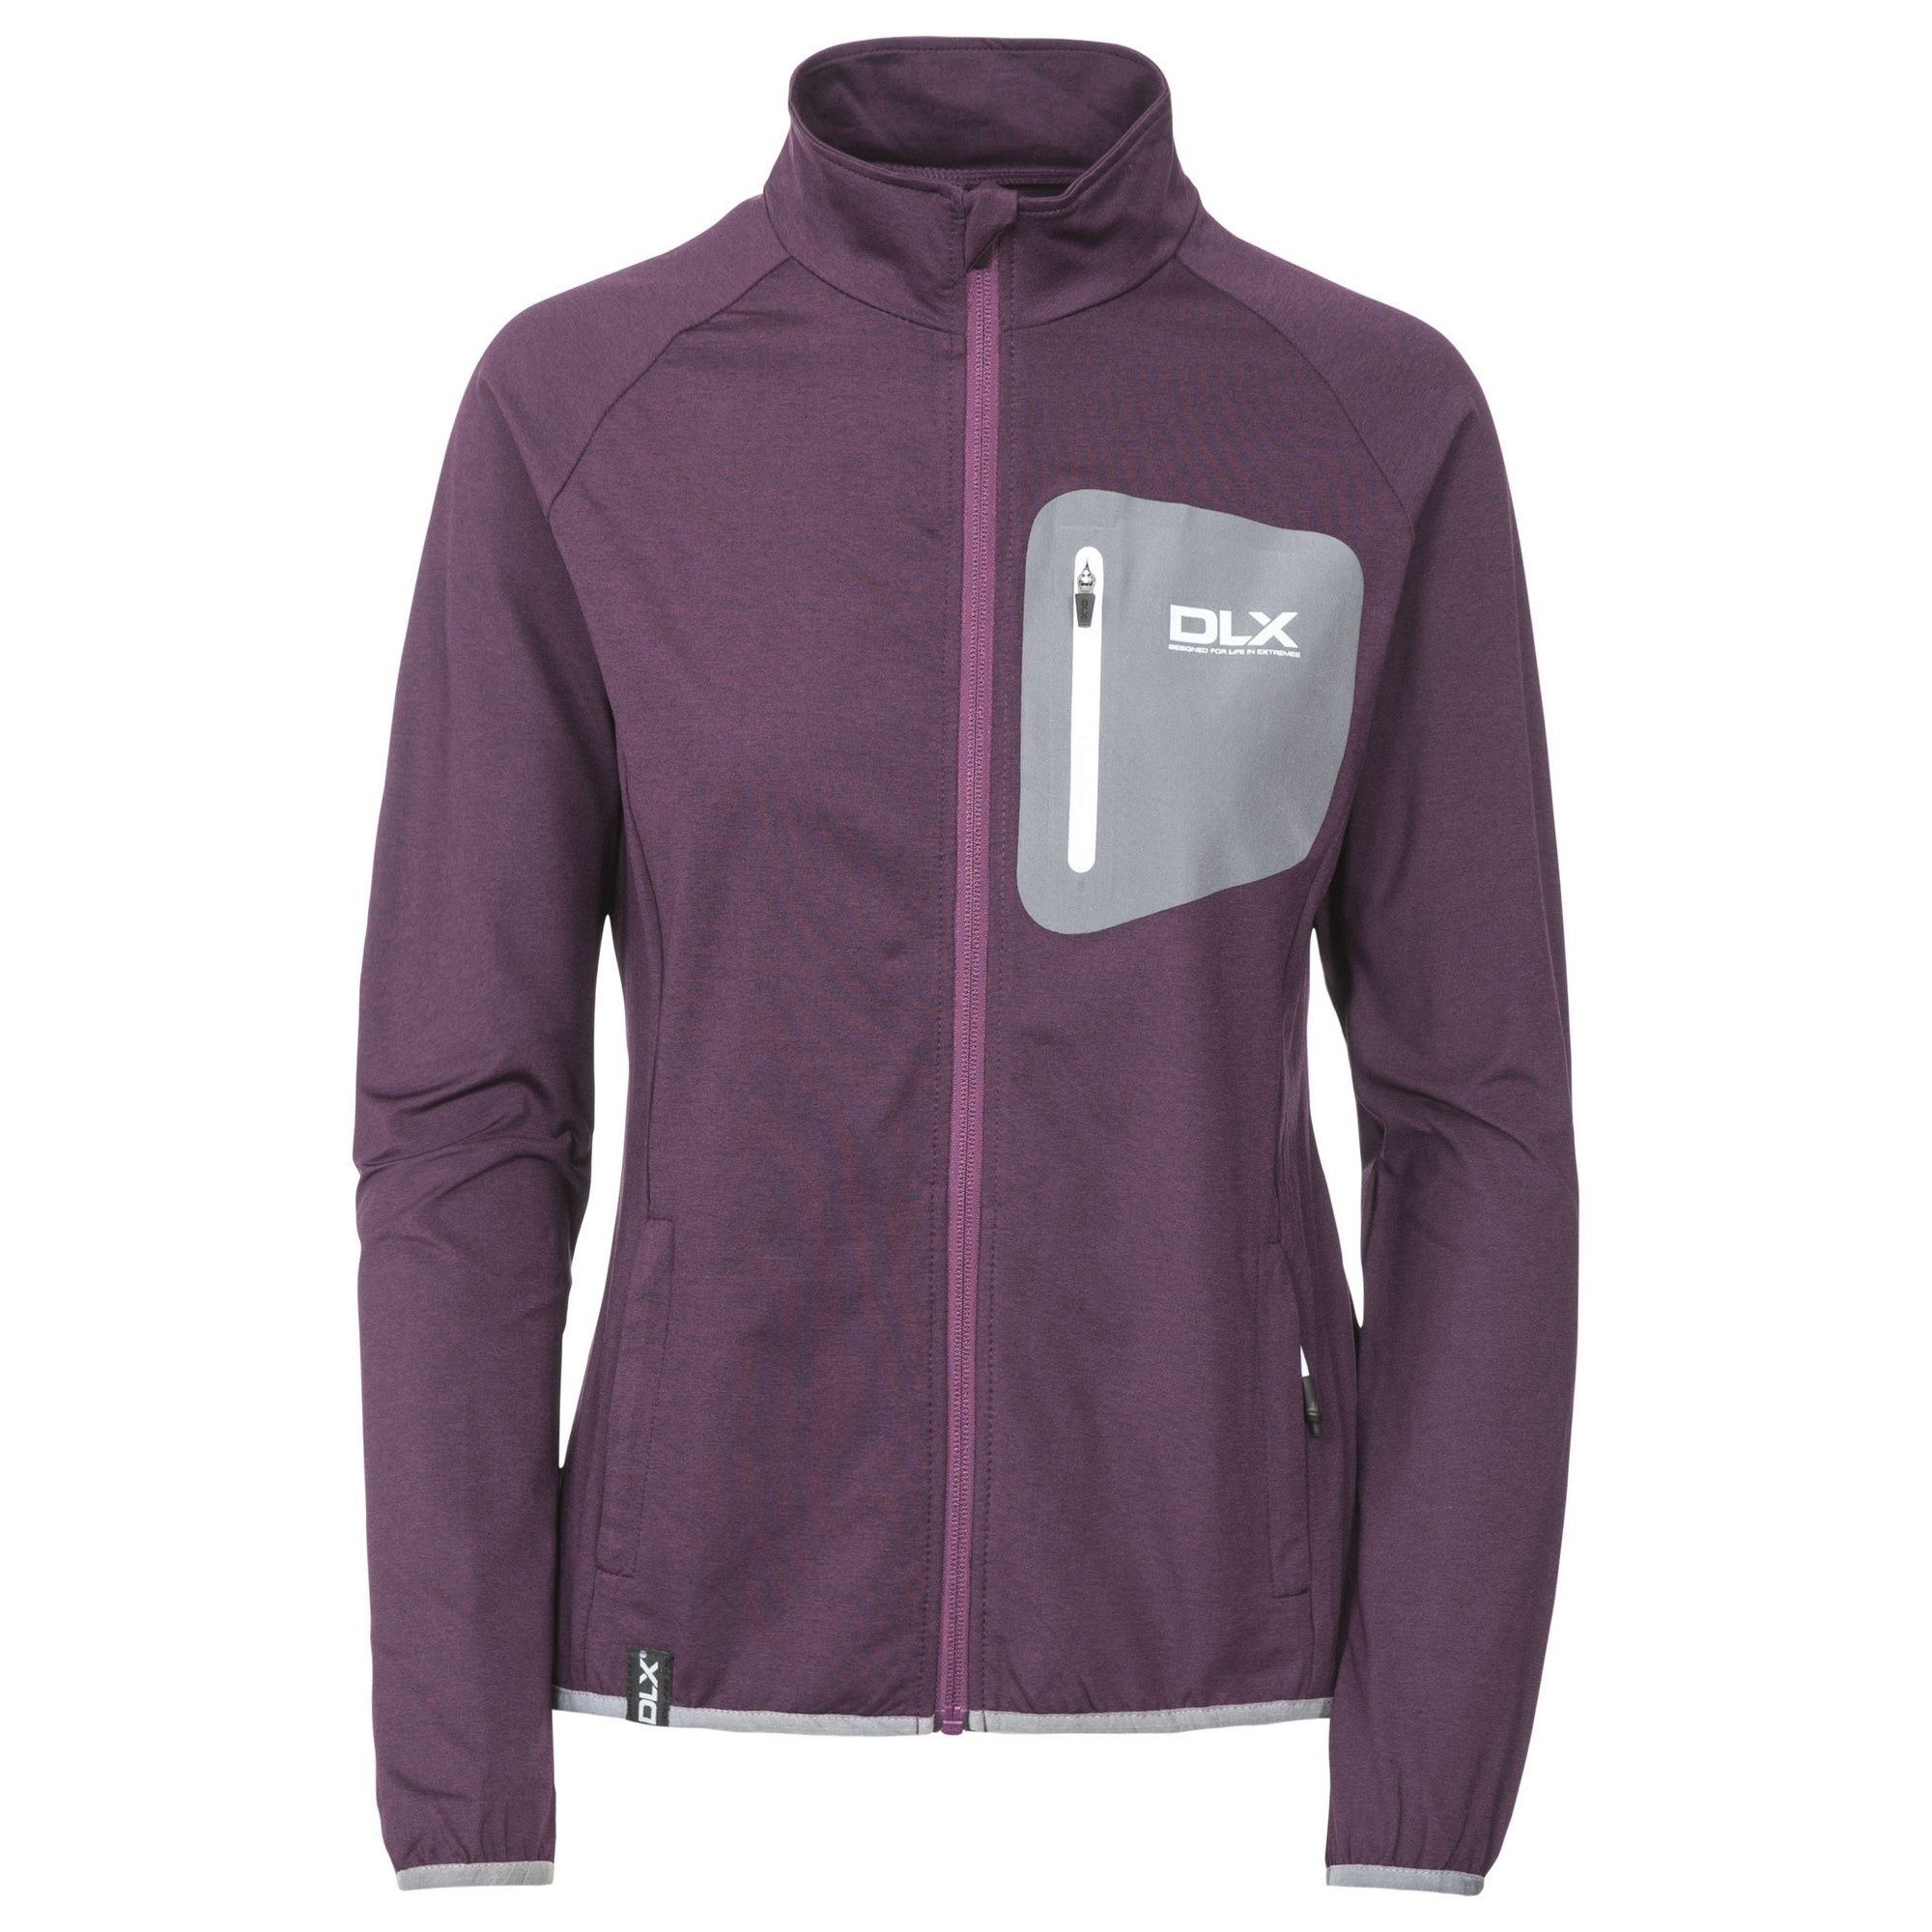 Full zip front with low profile zip. Contrast welded chest pocket. 2 zipped lower pockets. Contrast binding at hem and cuffs. Quick dry. 85% Polyester, 15% Elastane. Trespass Womens Chest Sizing (approx): XS/8 - 32in/81cm, S/10 - 34in/86cm, M/12 - 36in/91.4cm, L/14 - 38in/96.5cm, XL/16 - 40in/101.5cm, XXL/18 - 42in/106.5cm.